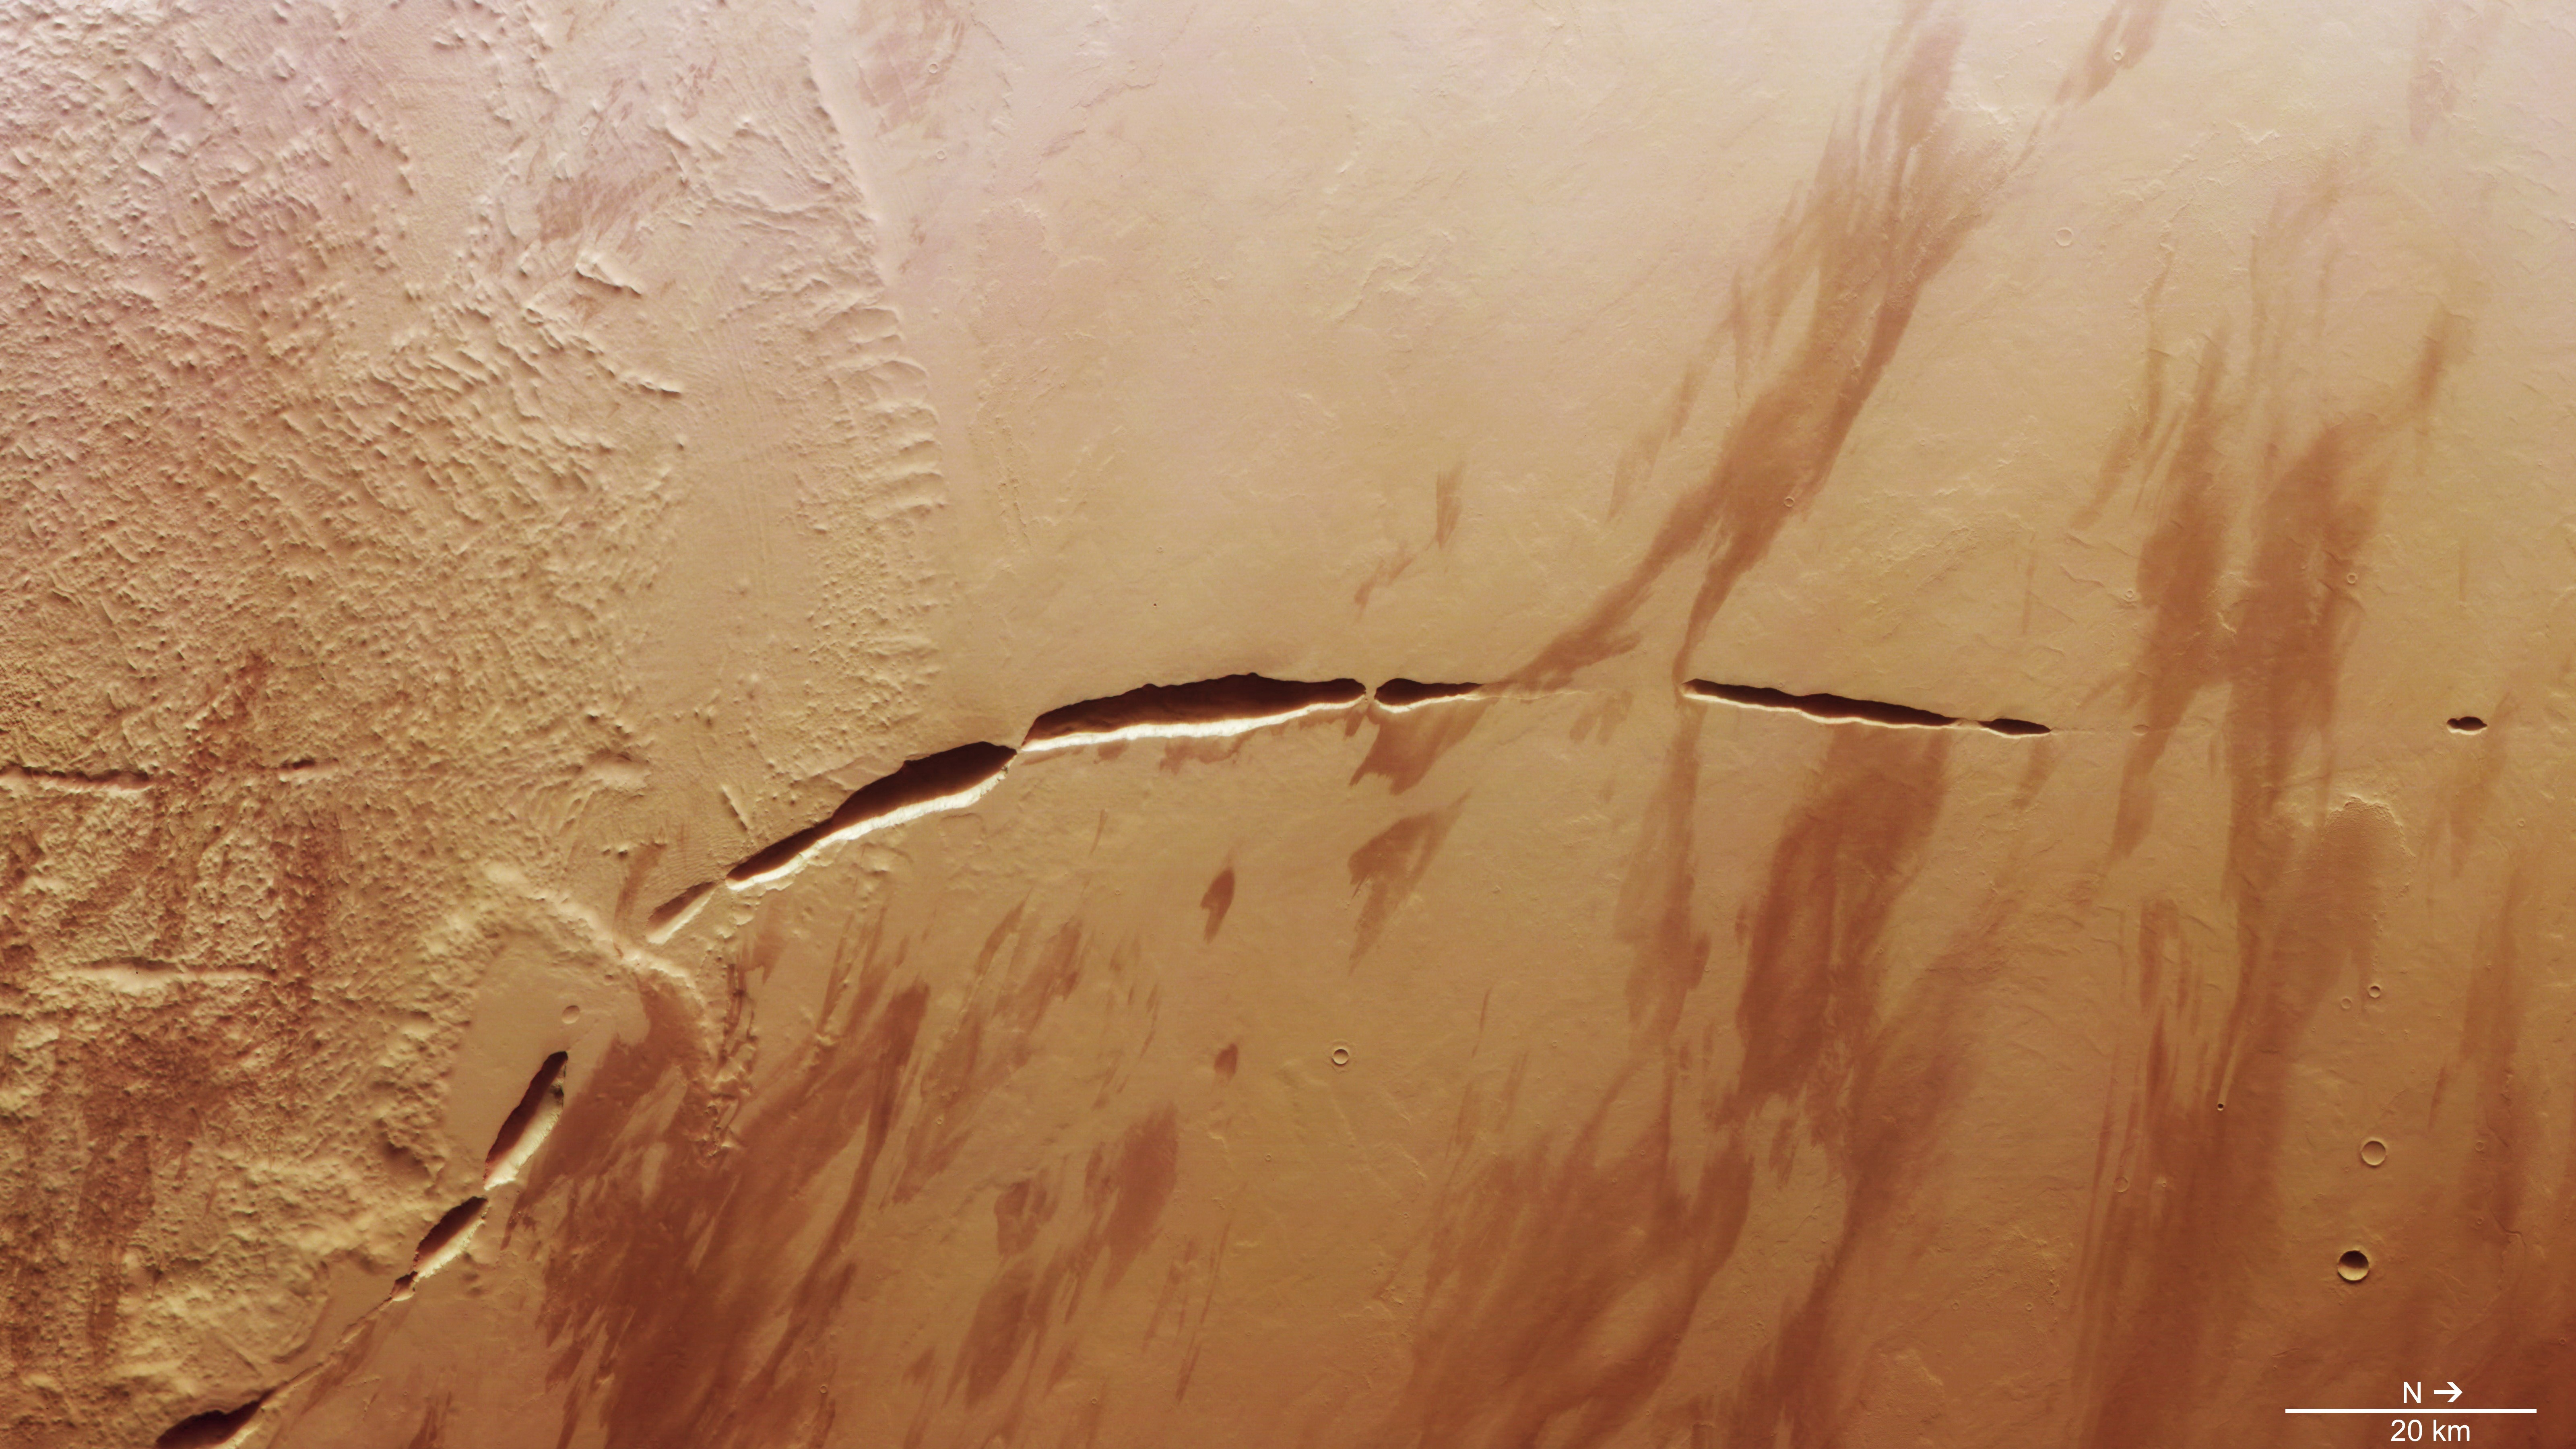 Mars orbiter captures Red Planet scar that’s longer than the Grand Canyon (image) Space